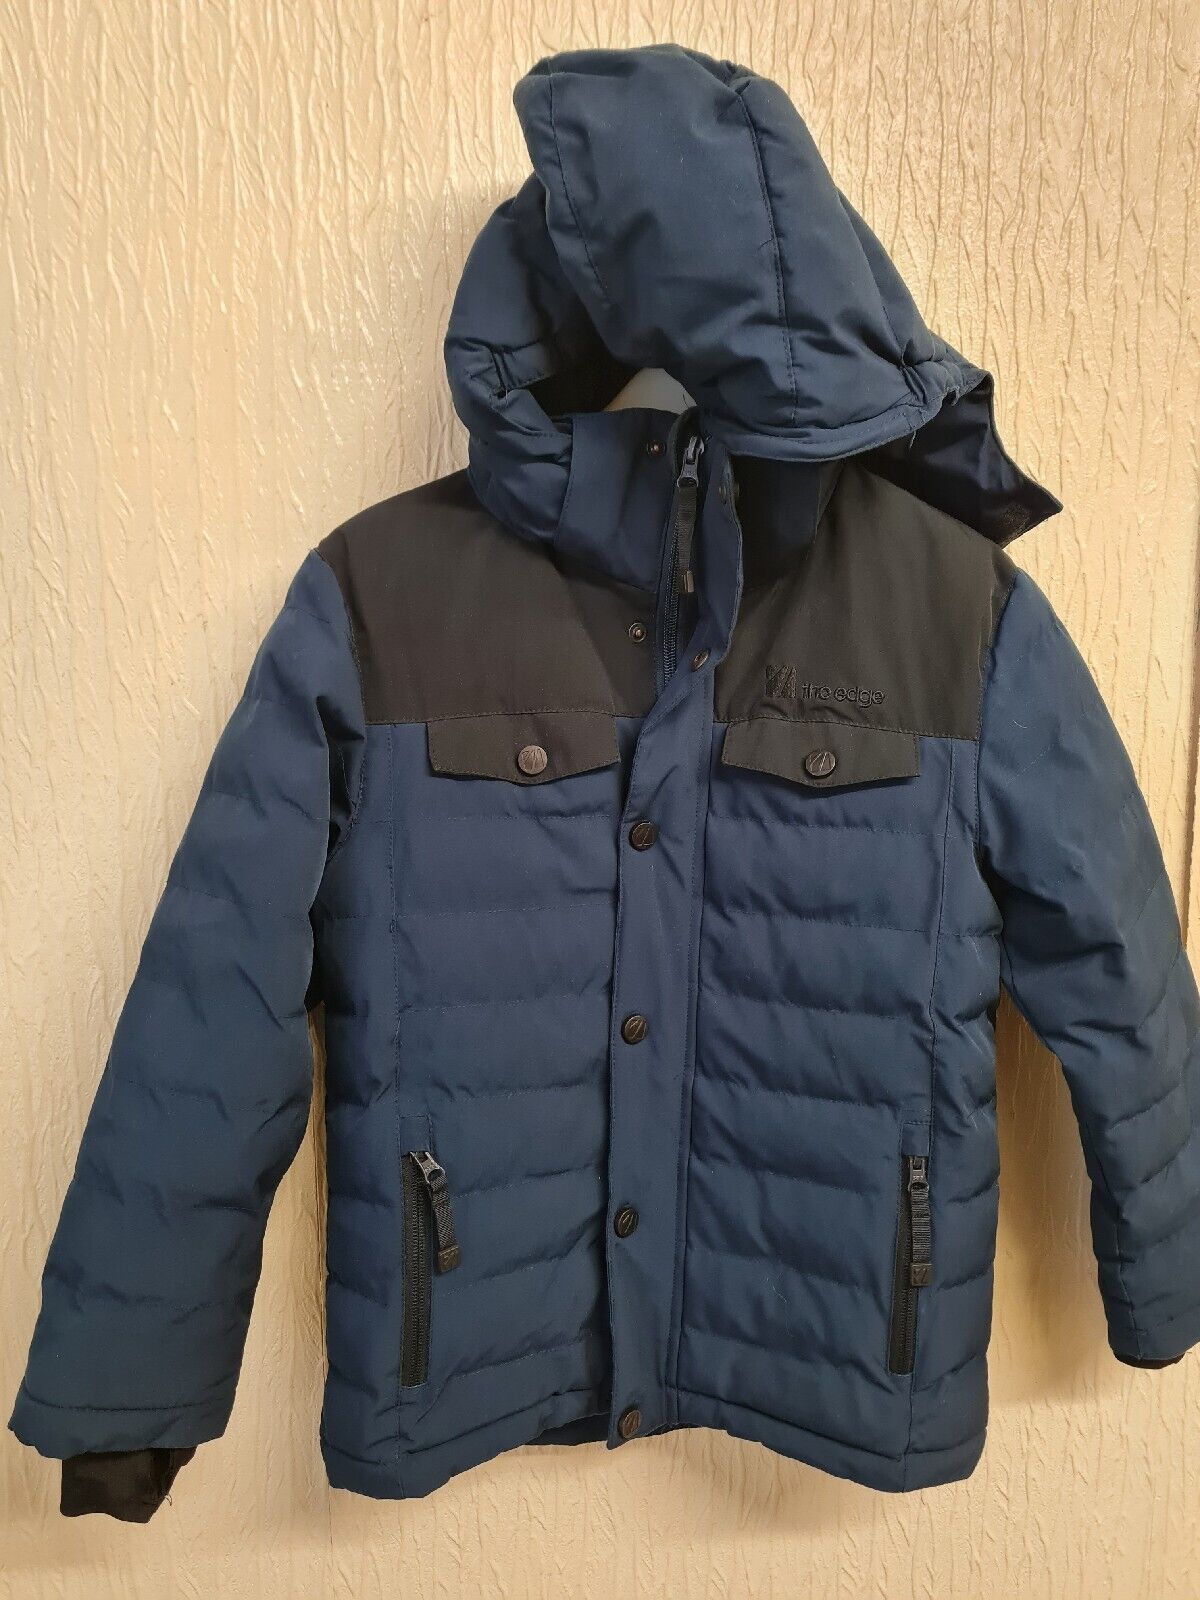 Primary image for The Edge Boy Jacket navy Blue 7/8years Express Shipping